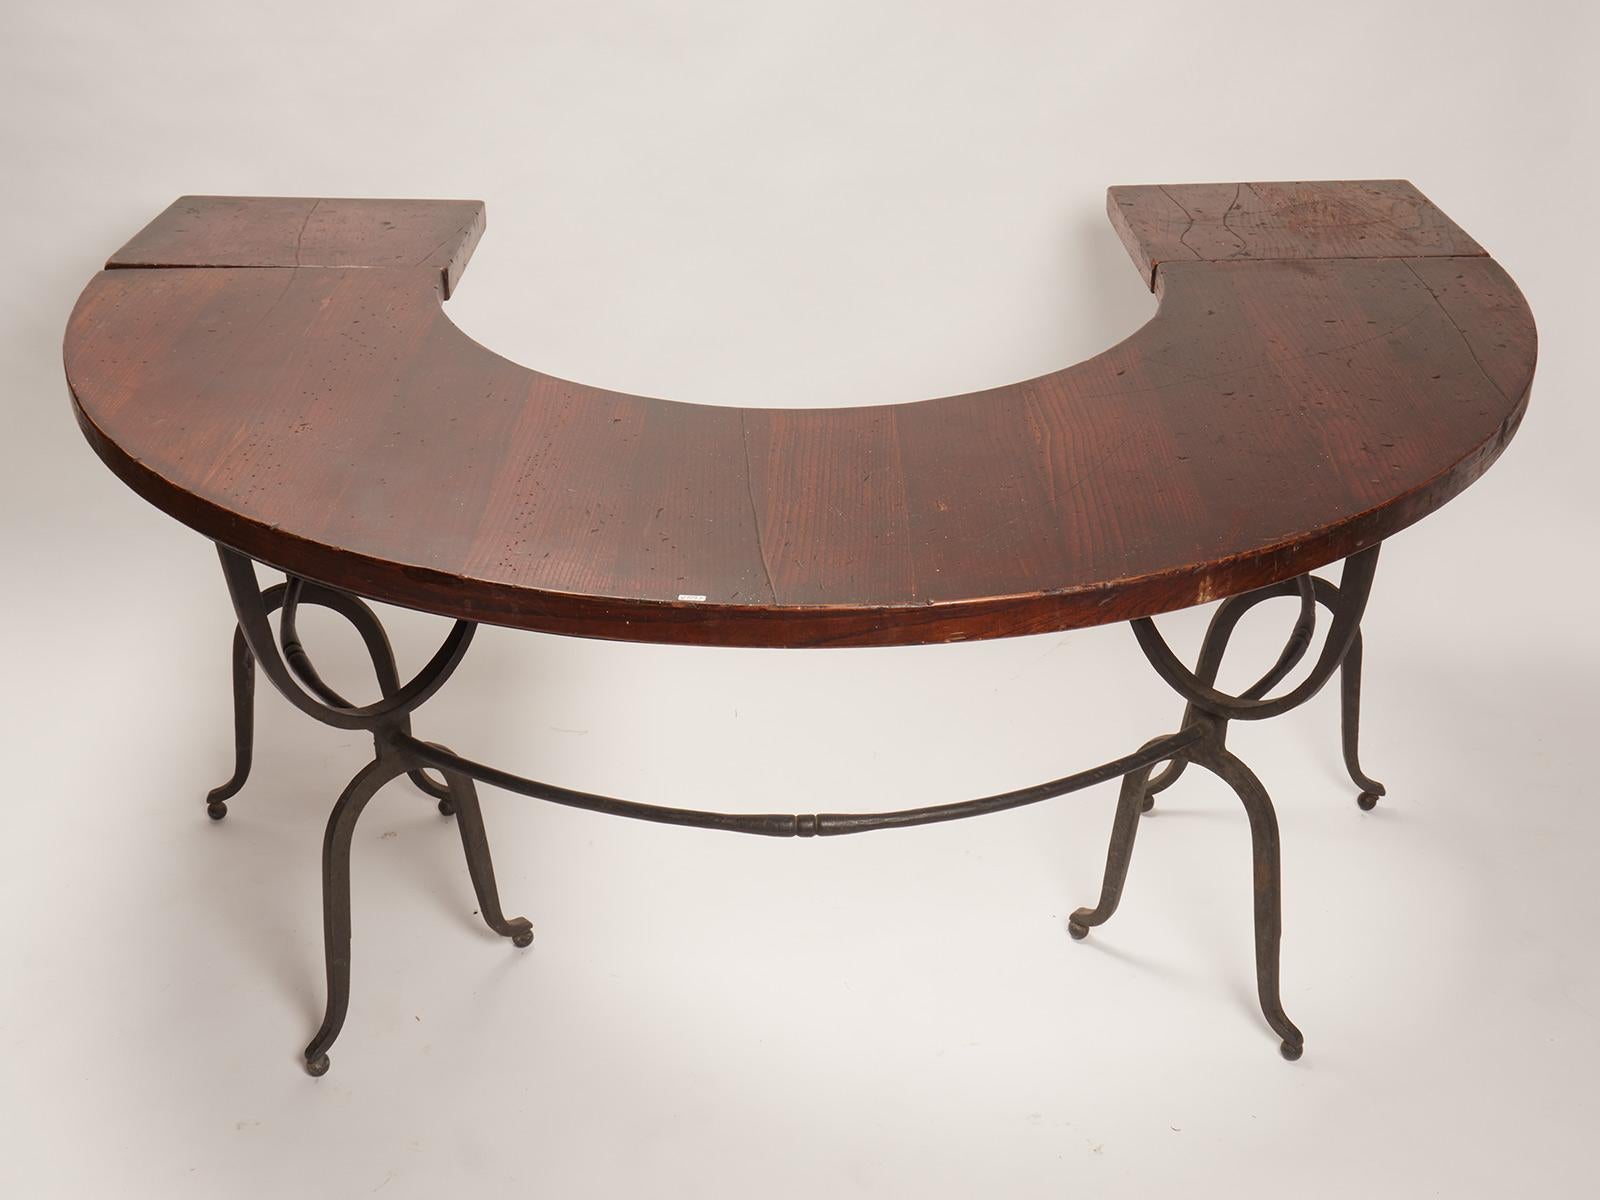 This unusual hunt table has cast-iron arch-shaped refined legs in an intrigued pattern and a demi-lune (semi-circle-shaped table), with a solid Teak wood shelf. Used for wine tasting. It has two extensions, one on each side. The United States, circa